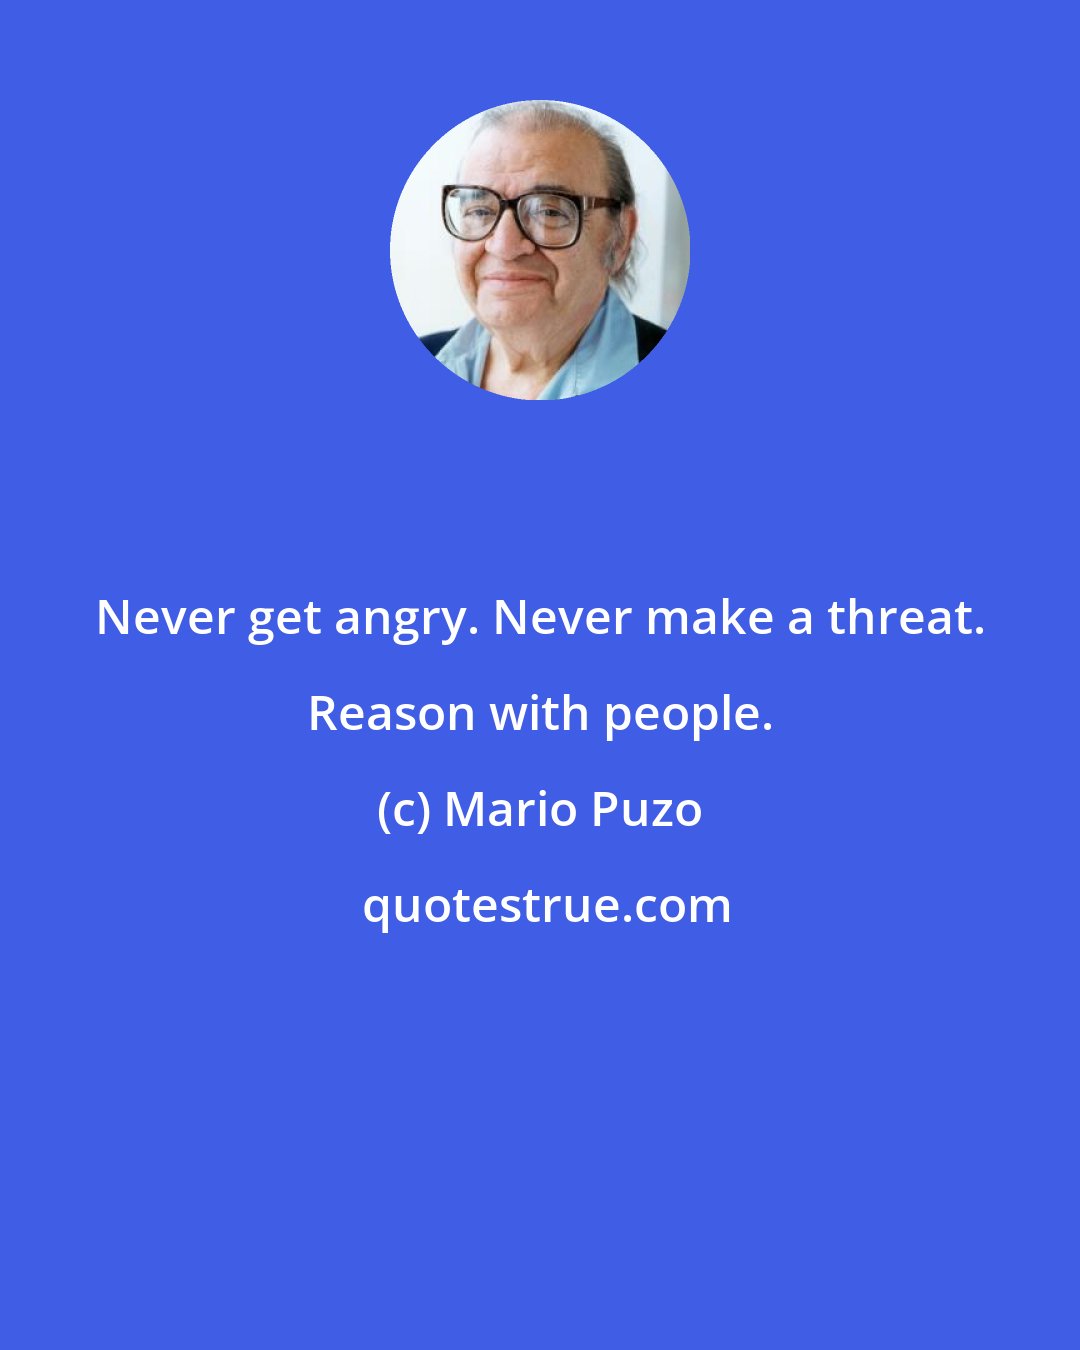 Mario Puzo: Never get angry. Never make a threat. Reason with people.